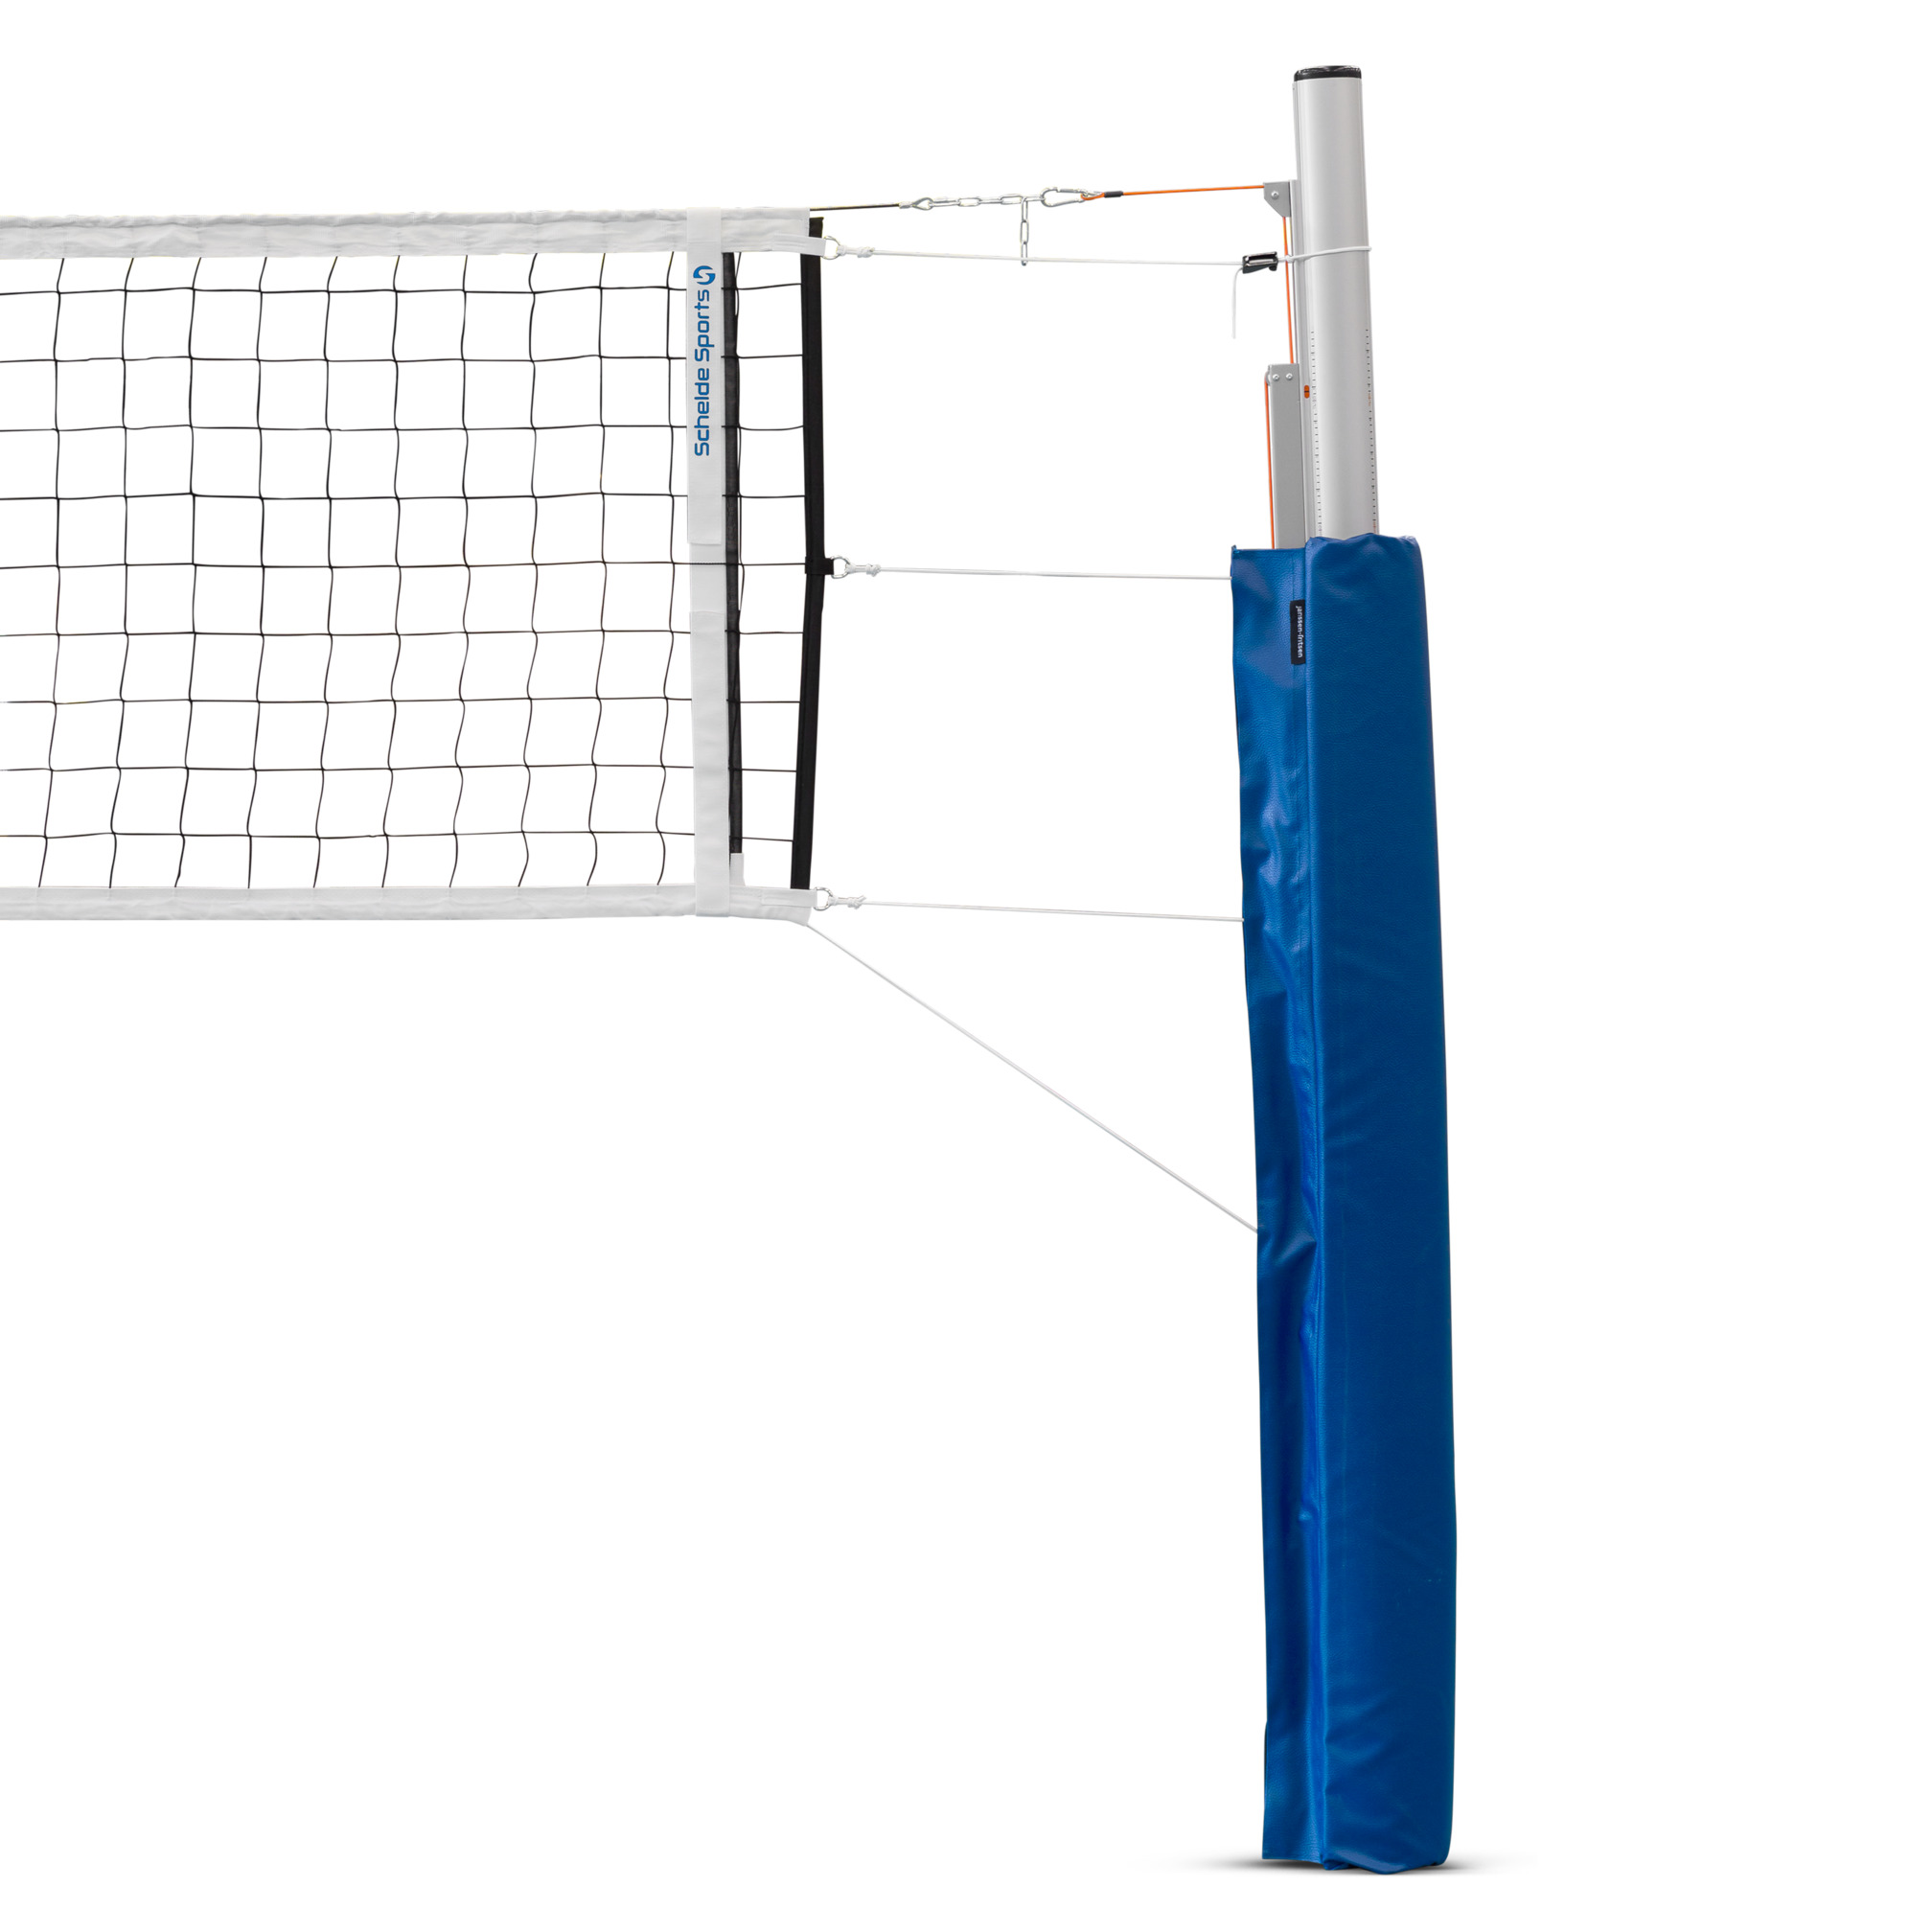 Protective padding for volleyball posts